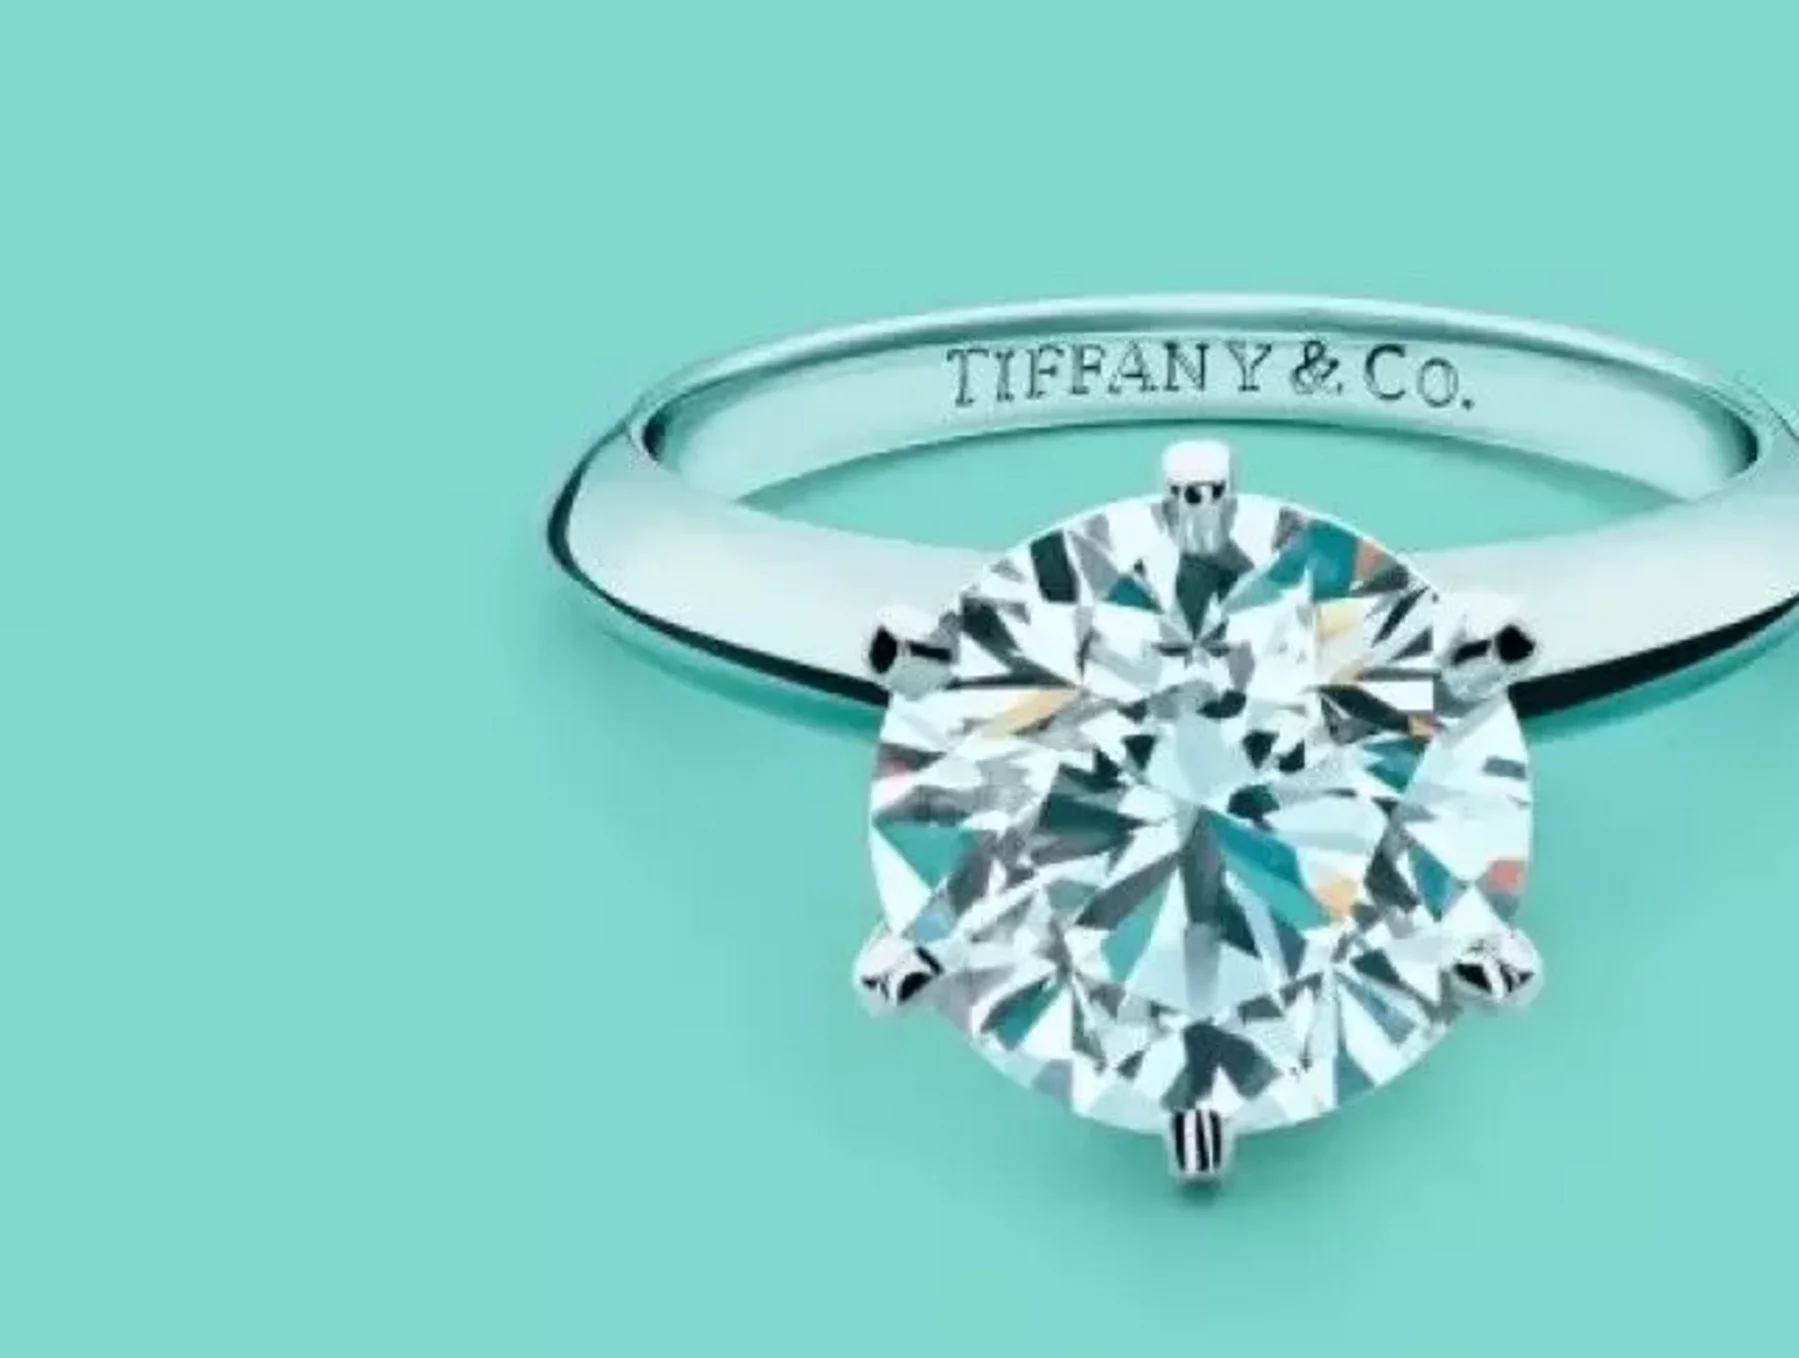 Kowalski to retire from Tiffany & Co. CEO role